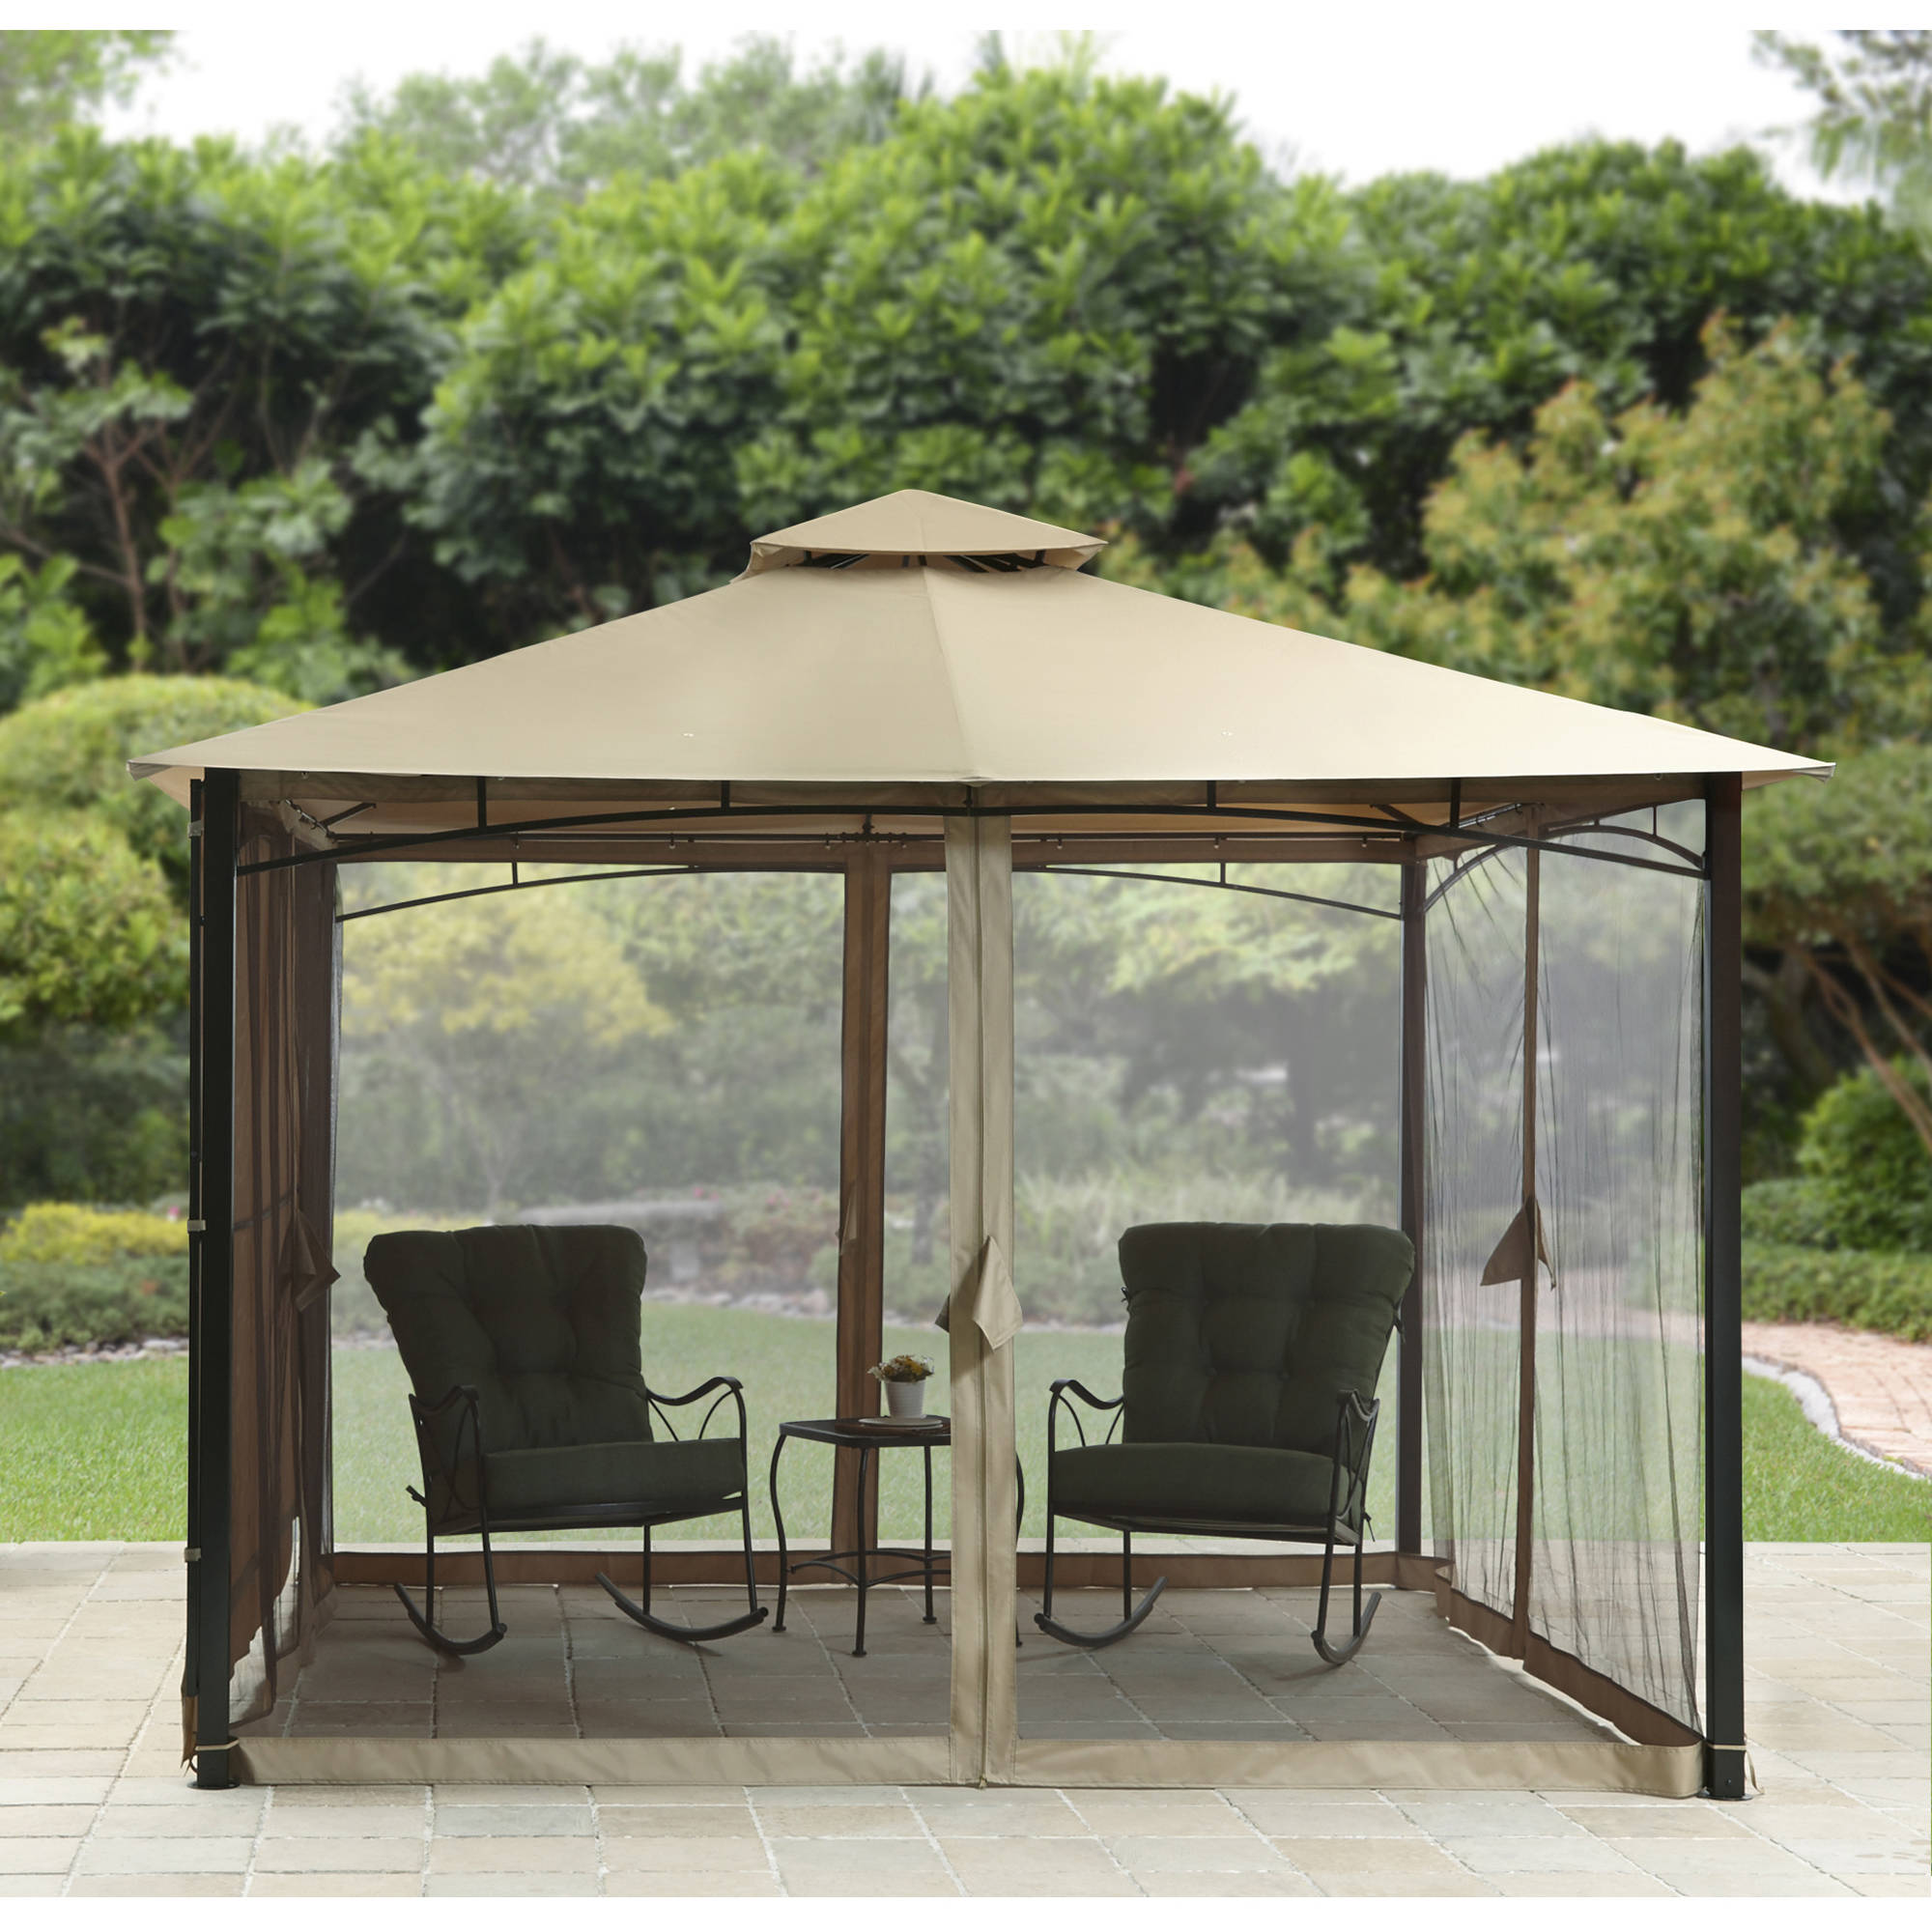 Better Homes & Gardens Canal Drive 11' x 11' Cabin Style Gazebo with Adjustable Side - image 2 of 4